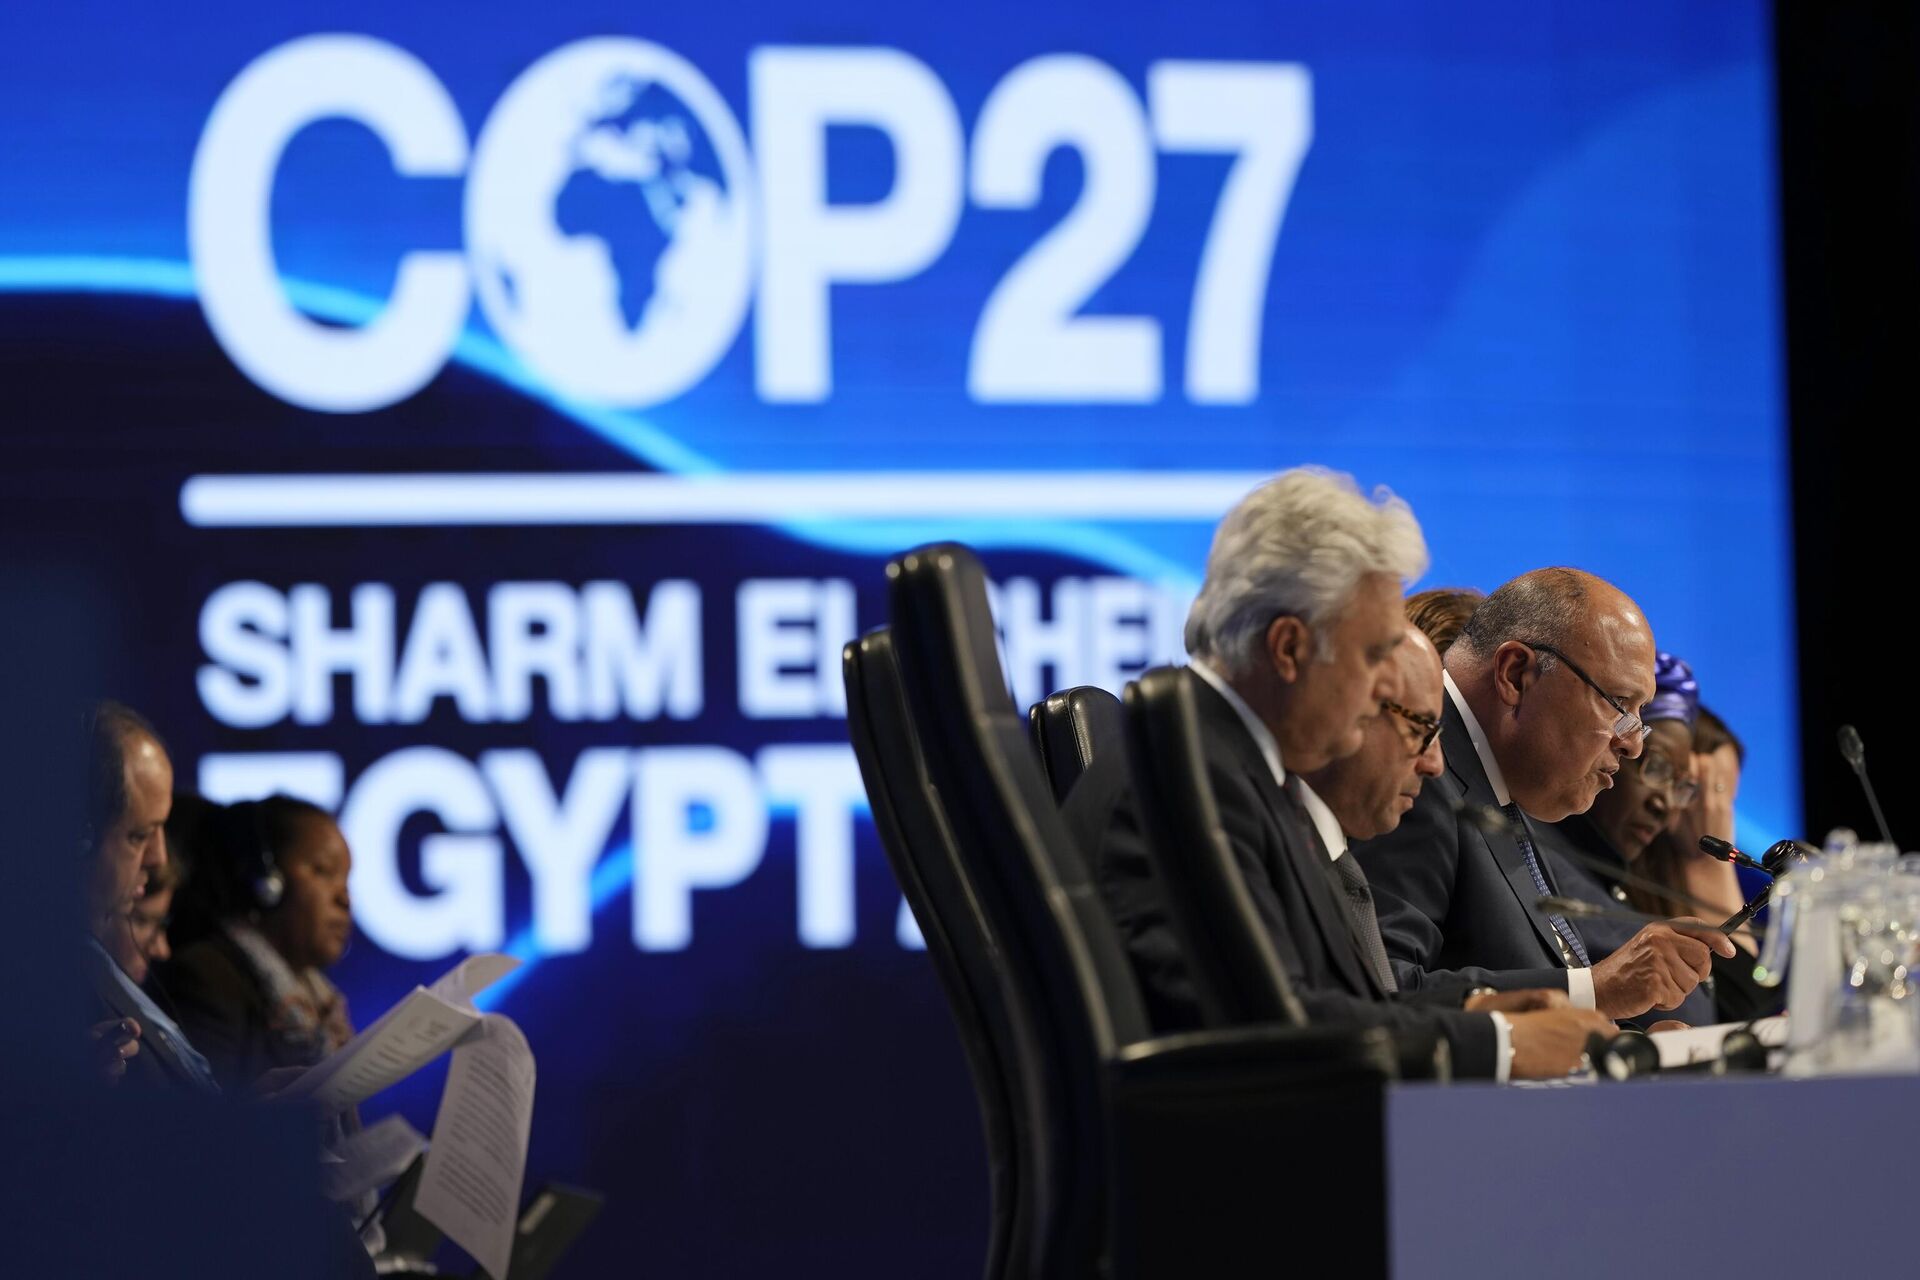 Sameh Shoukry, president of the COP27 climate summit, right, speaks during a closing plenary session at the U.N. Climate Summit, Sunday, Nov. 20, 2022, in Sharm el-Sheikh, Egypt. - Sputnik International, 1920, 31.12.2022